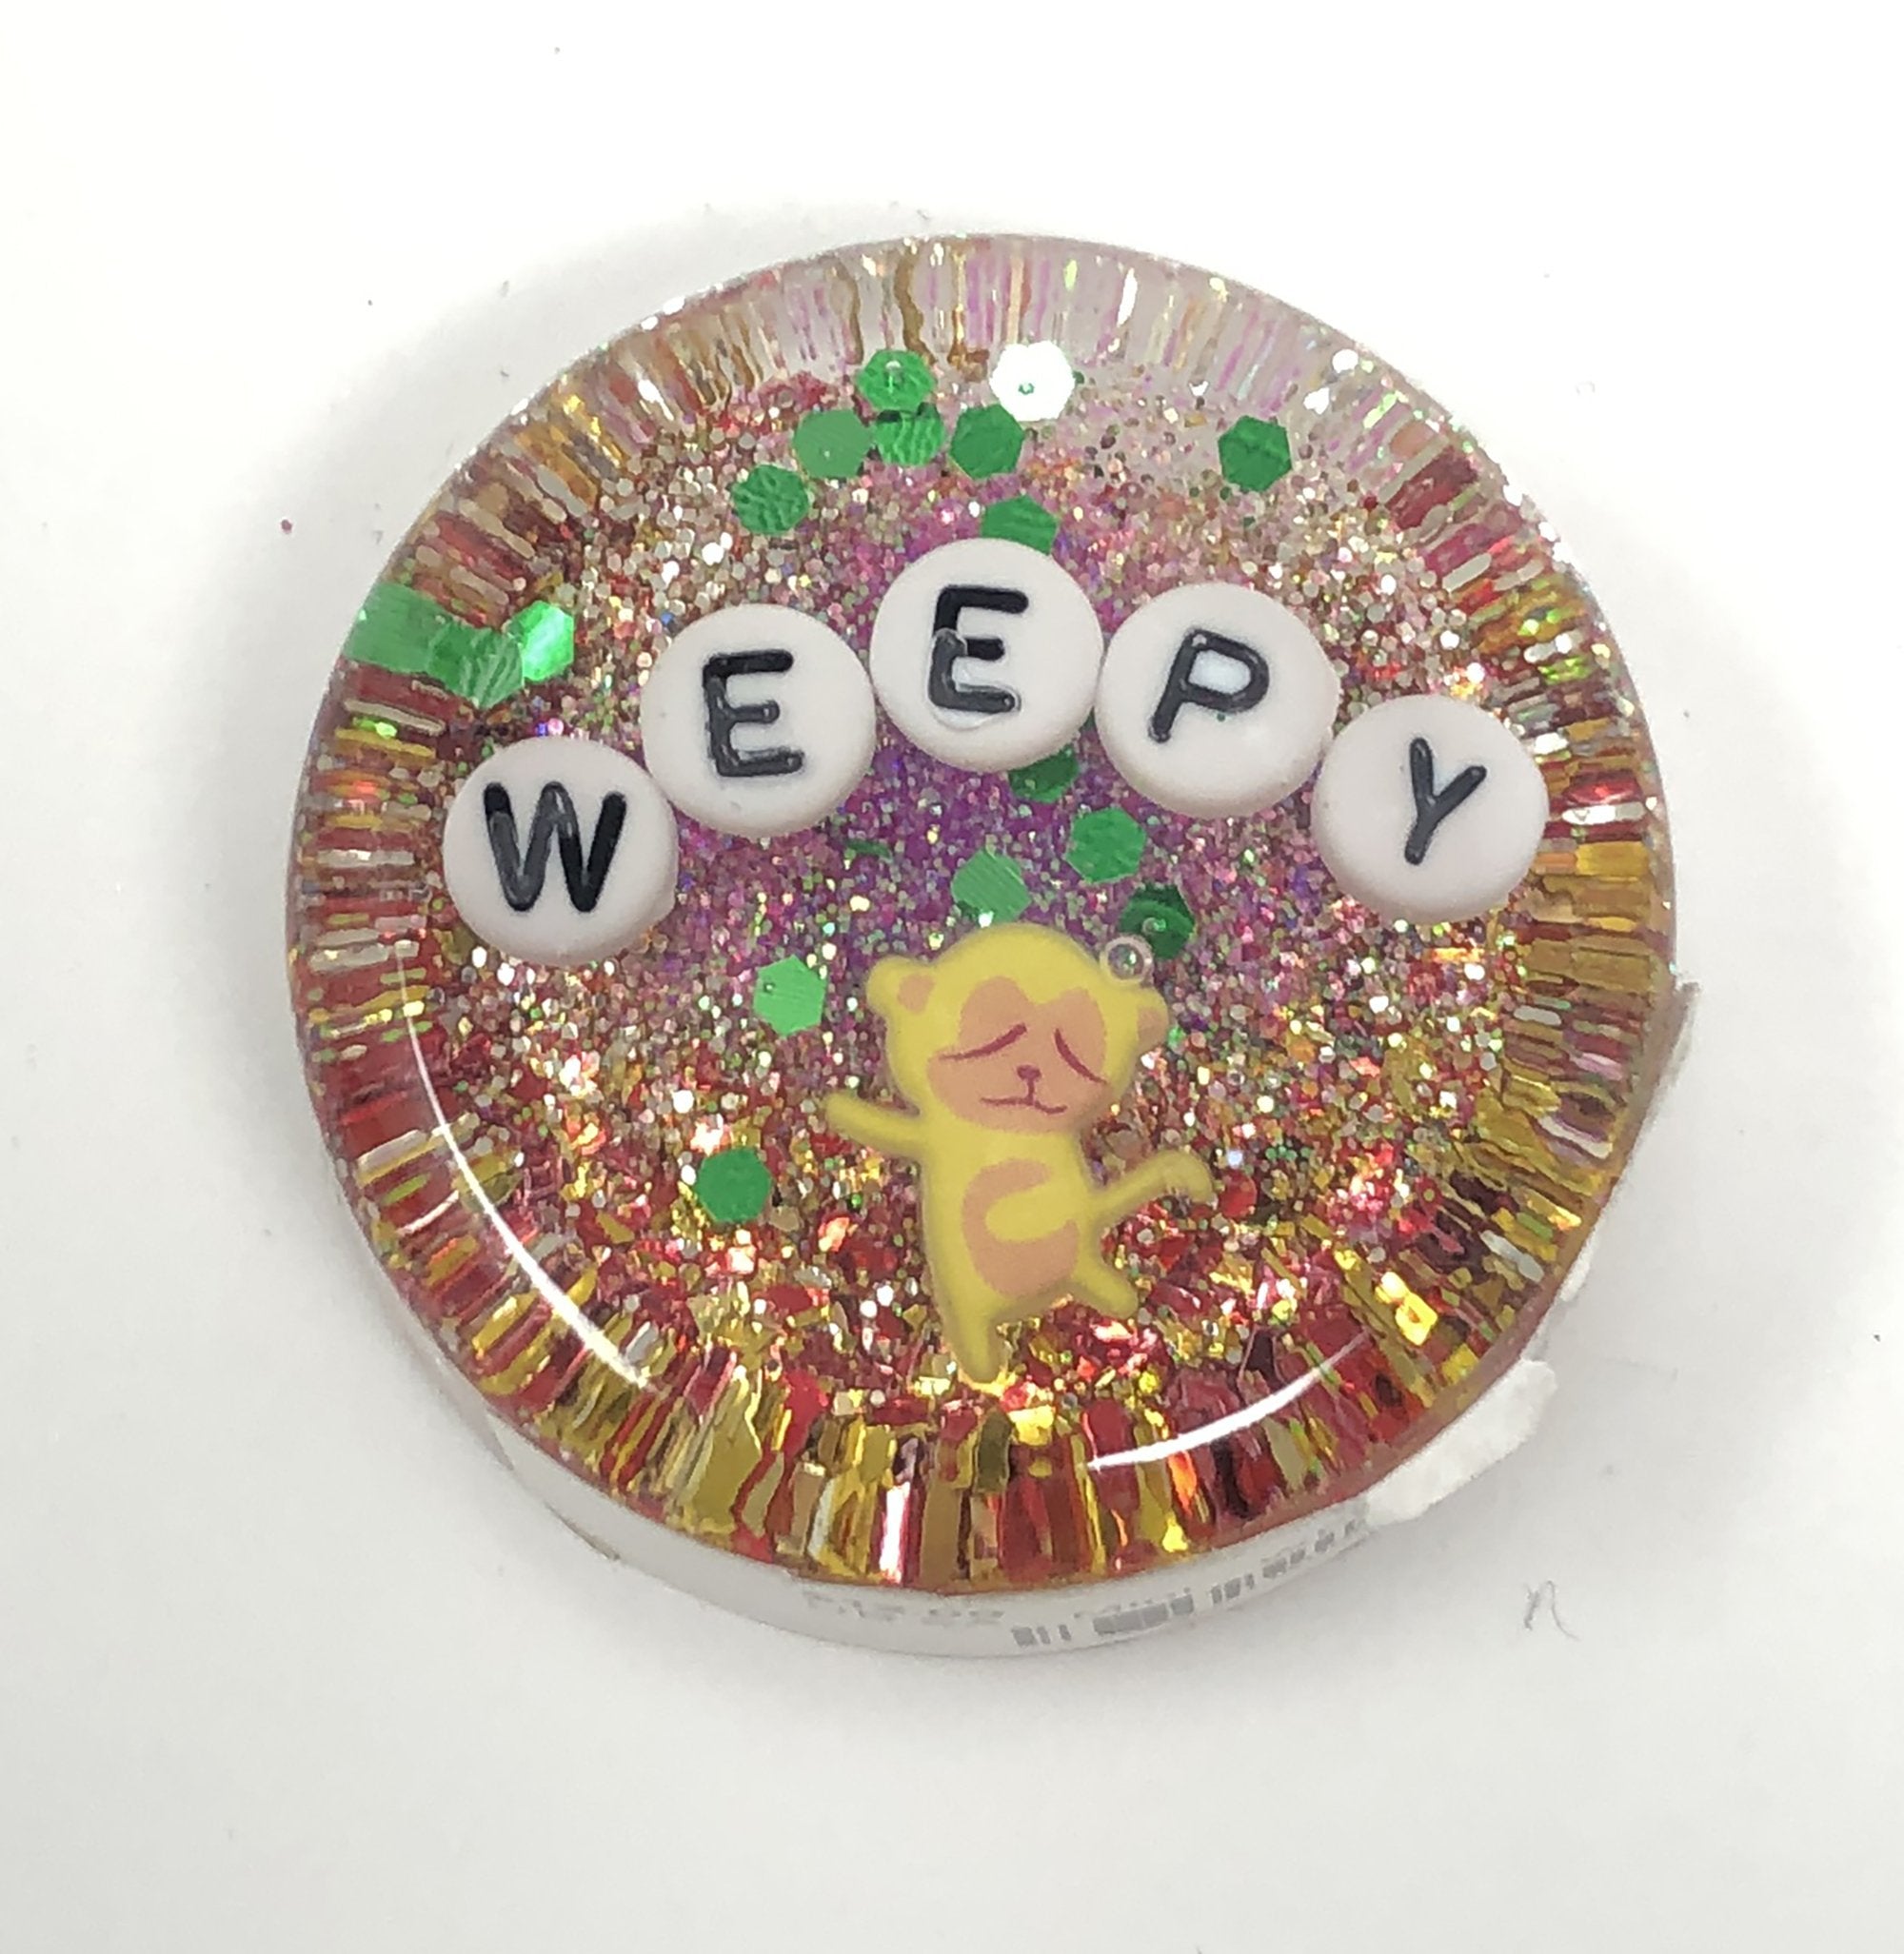 Weepy - Shower Art - READY TO SHIP